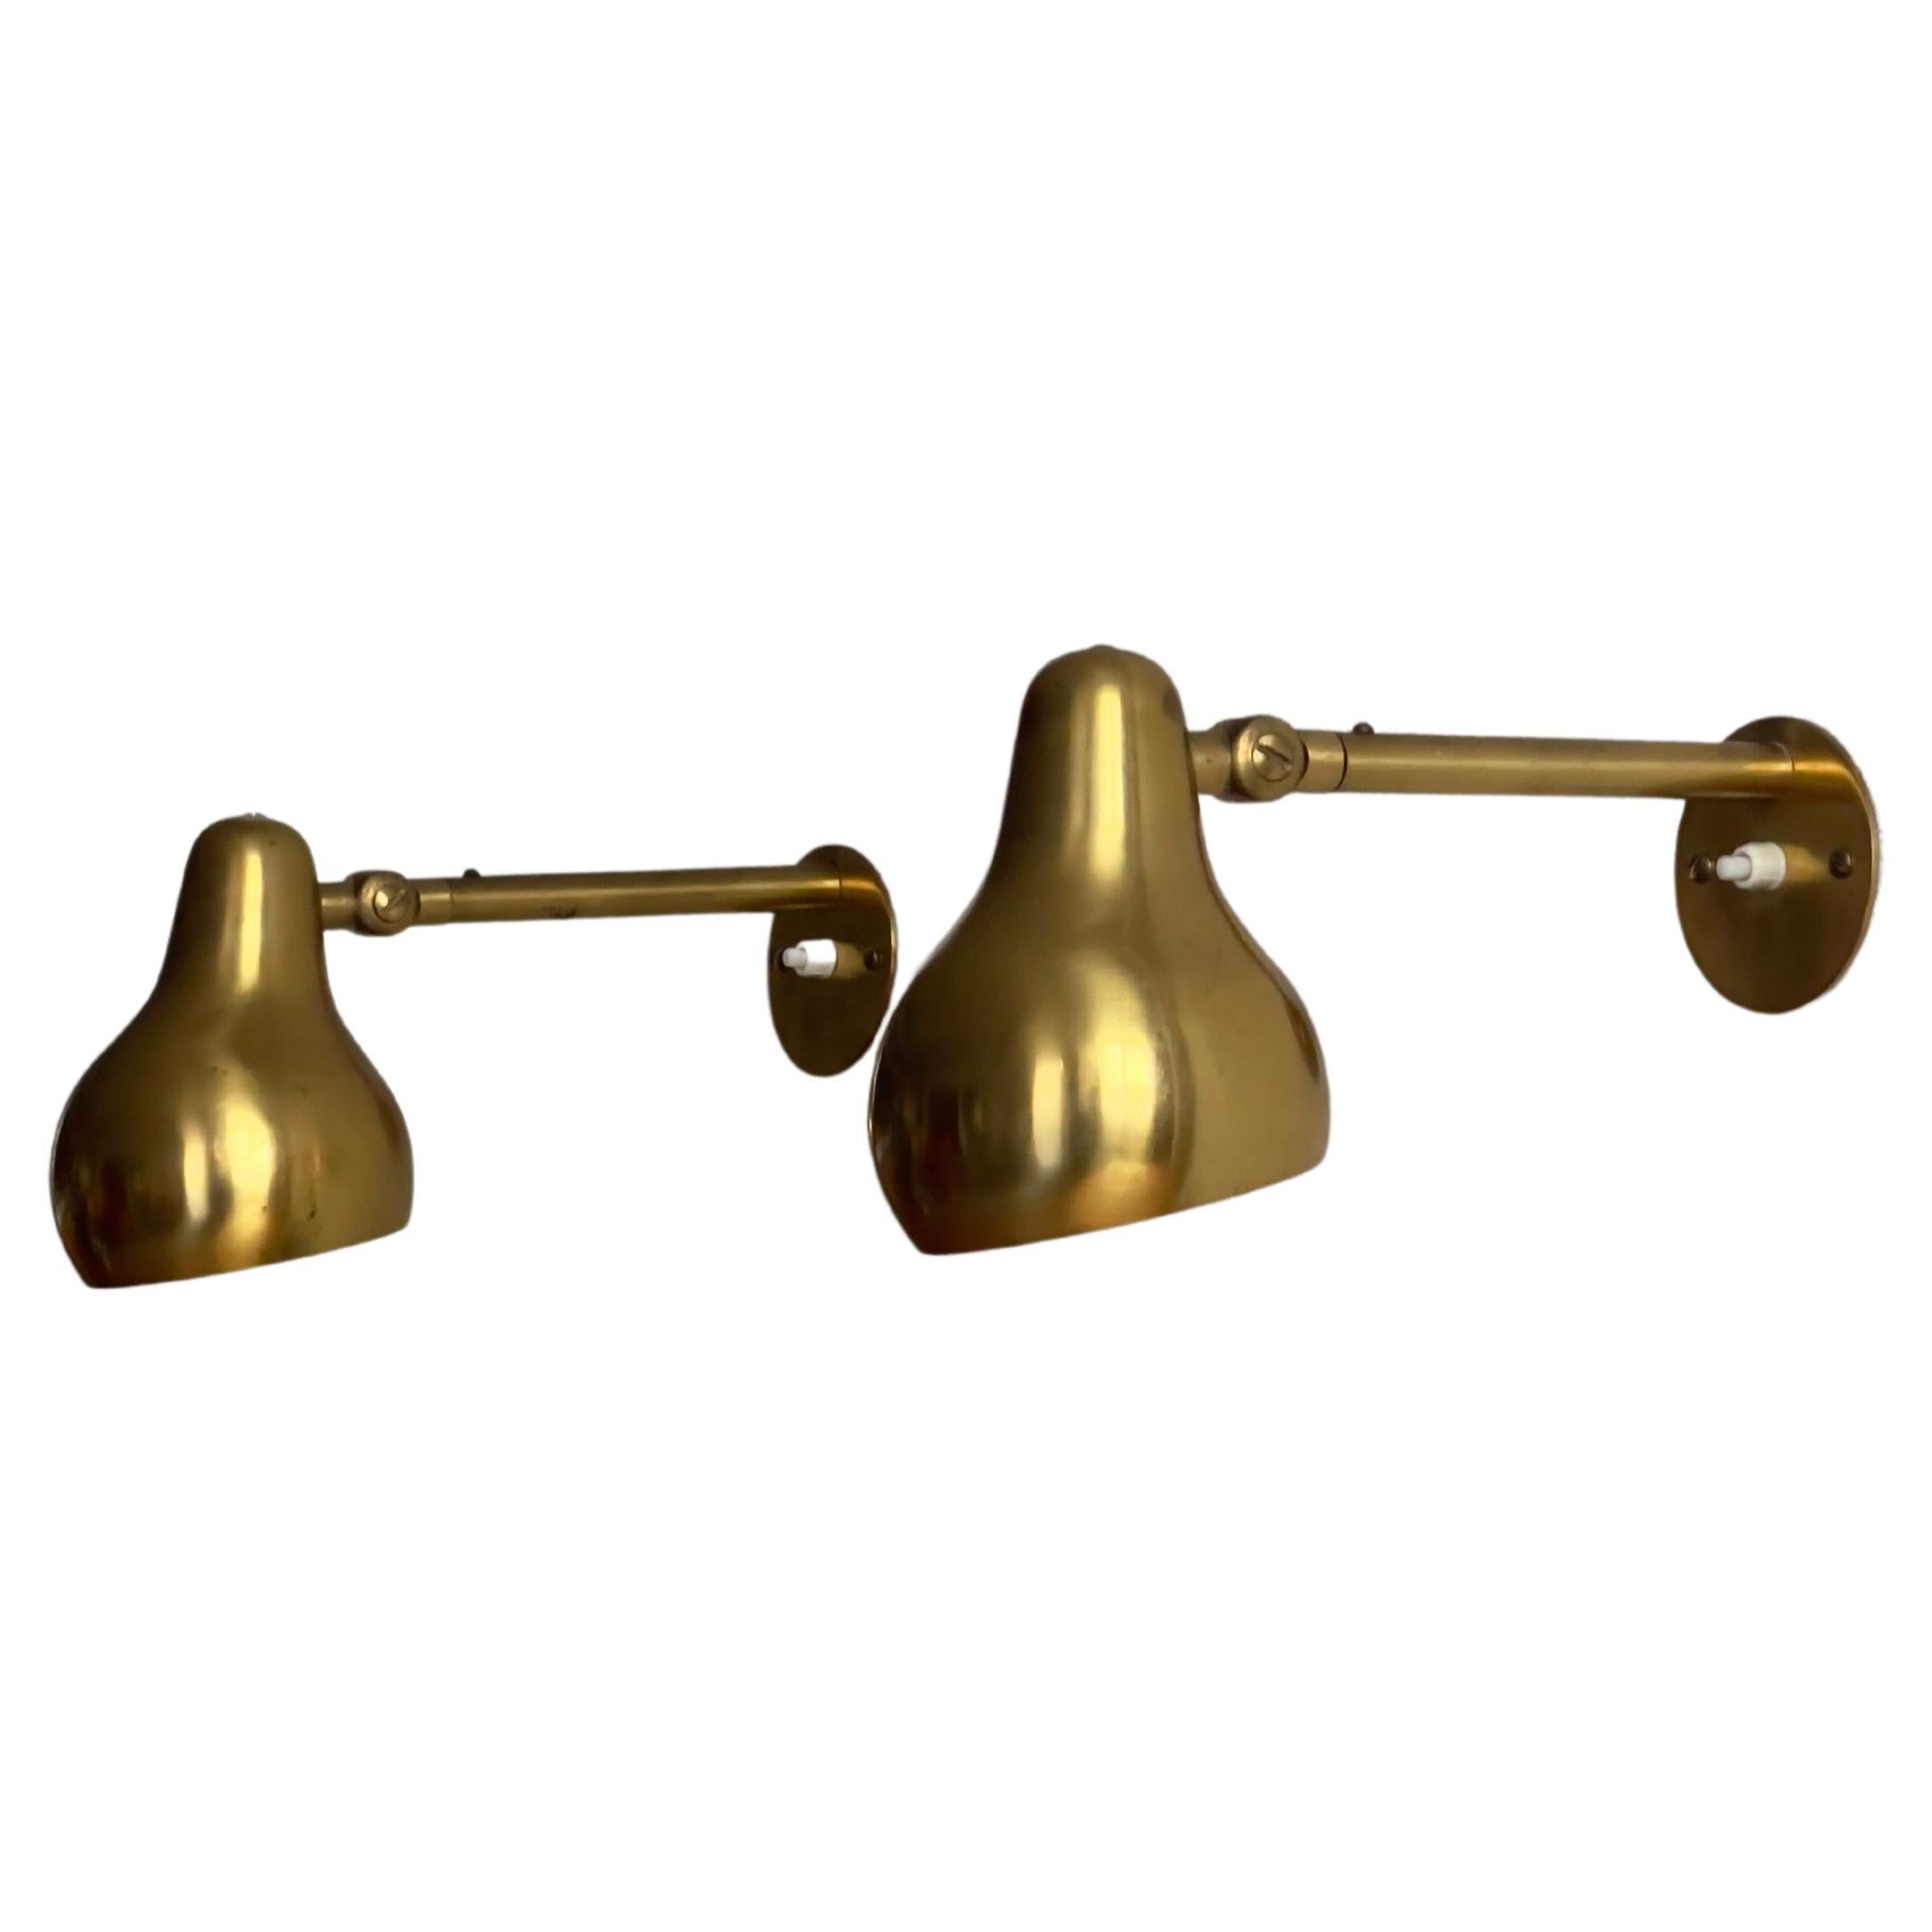 Rare Original Pair of 1940s Wilhelm Lauritzen wall lights in patinated brass. For Sale